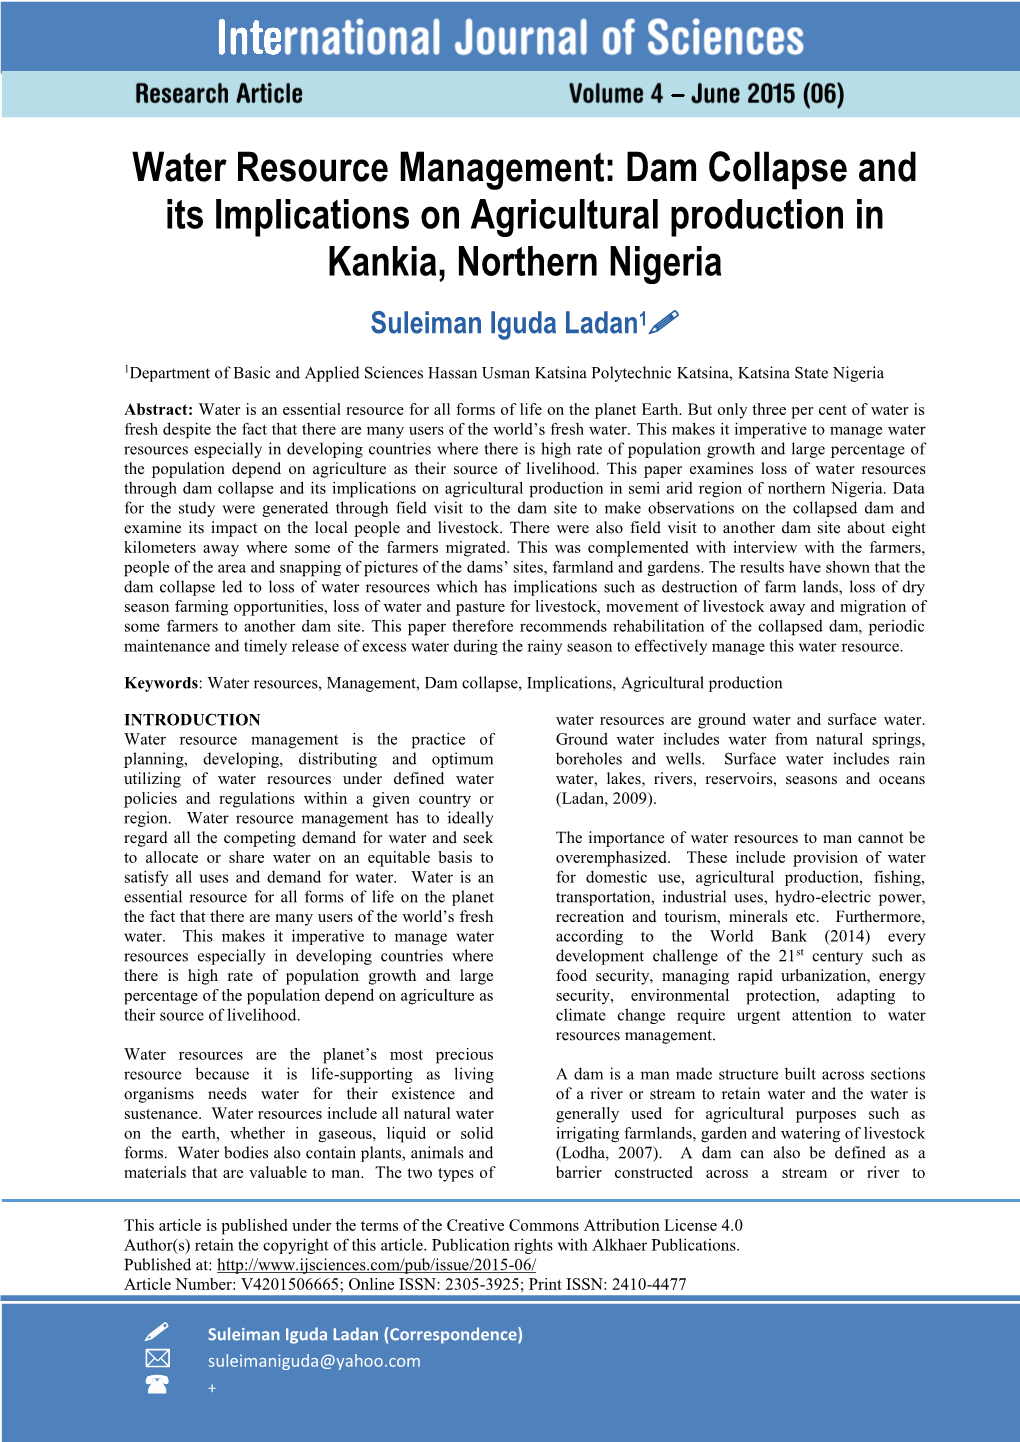 Dam Collapse and Its Implications on Agricultural Production in Kankia, Northern Nigeria Suleiman Iguda Ladan1